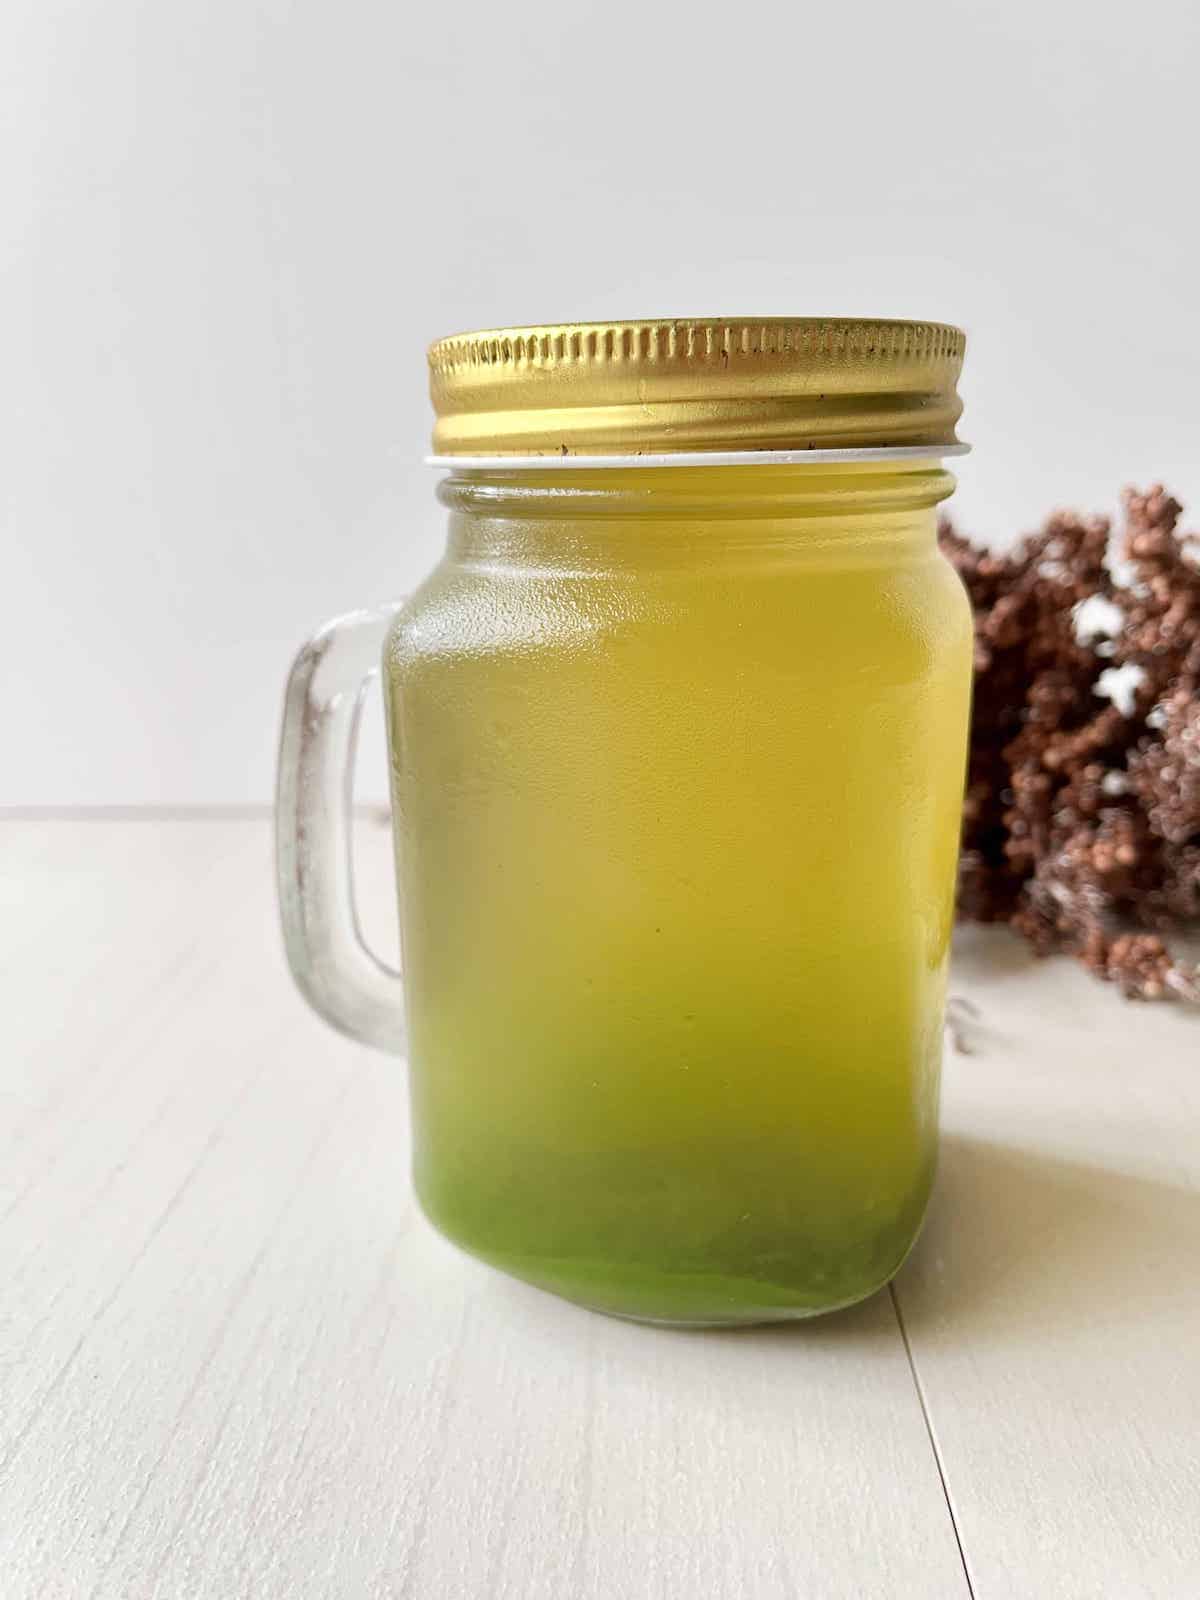 A container of pandan juice that has had the darker pandan extract settle at the bottom.